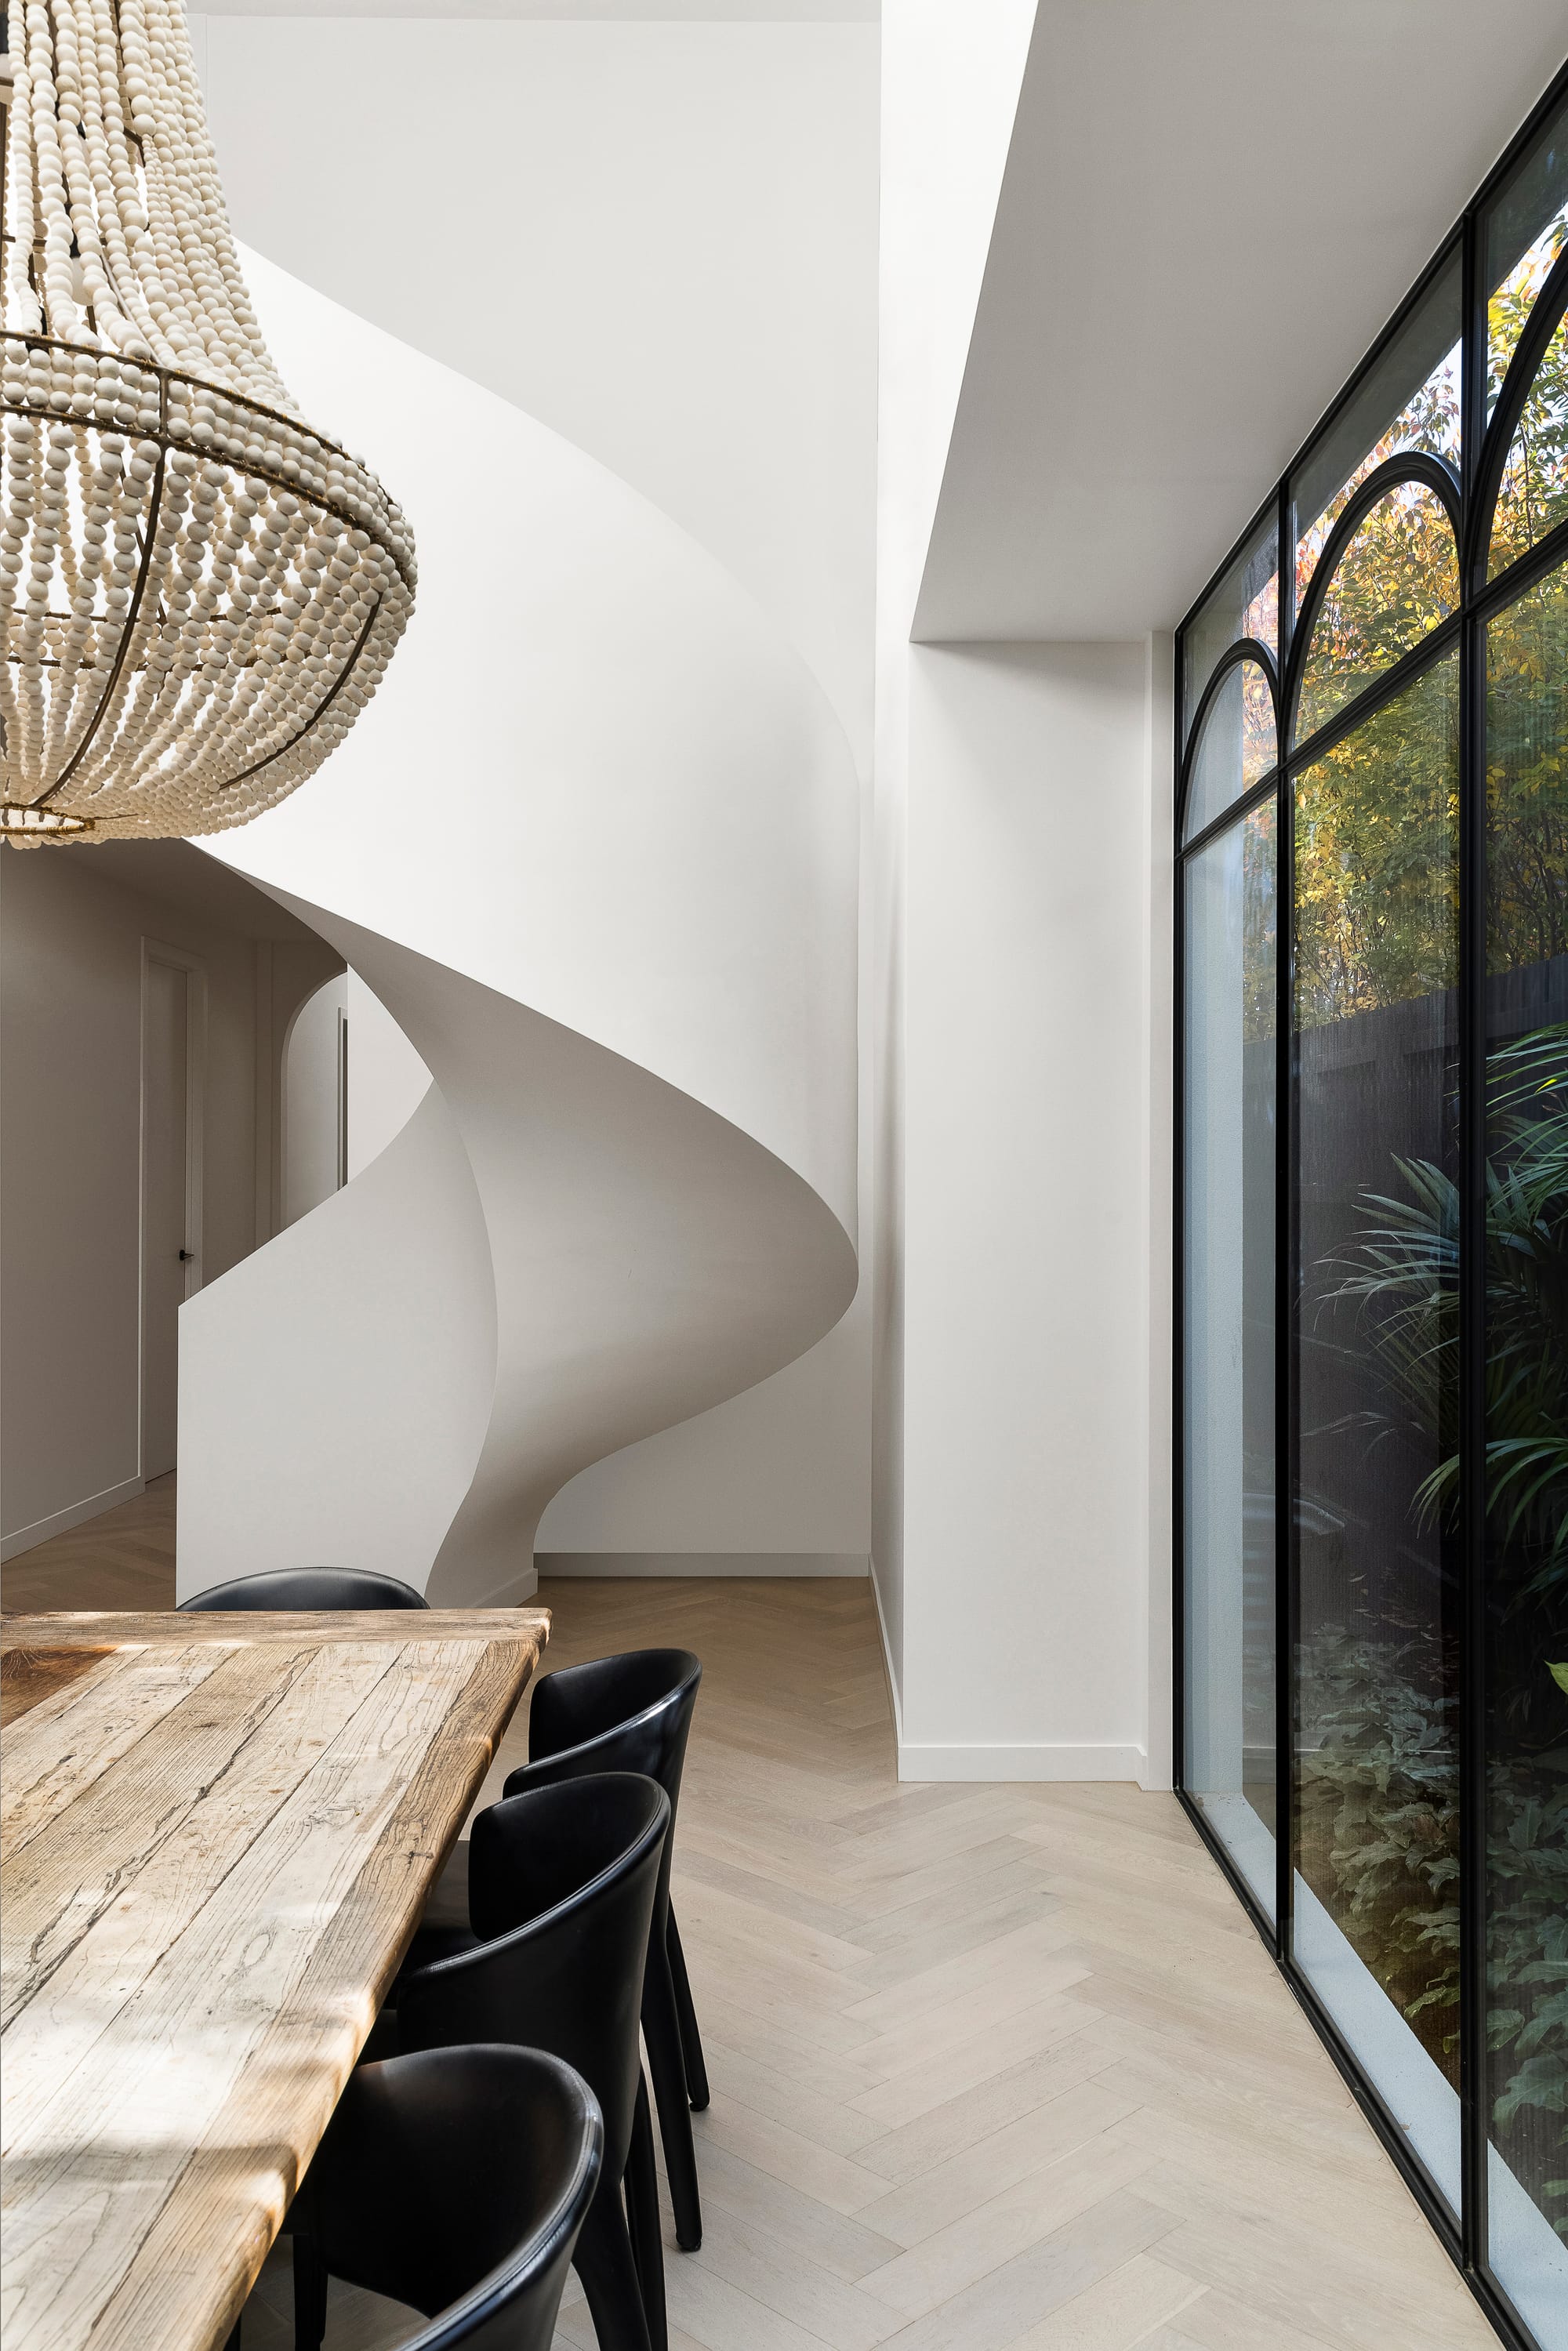 Goldsmith Residence by C.Kairouz Architects. Photography by Spacecraft. Curved staircase behind timber dining table and black chairs. Pale timber herringbone floors. Large beaded pendant light.